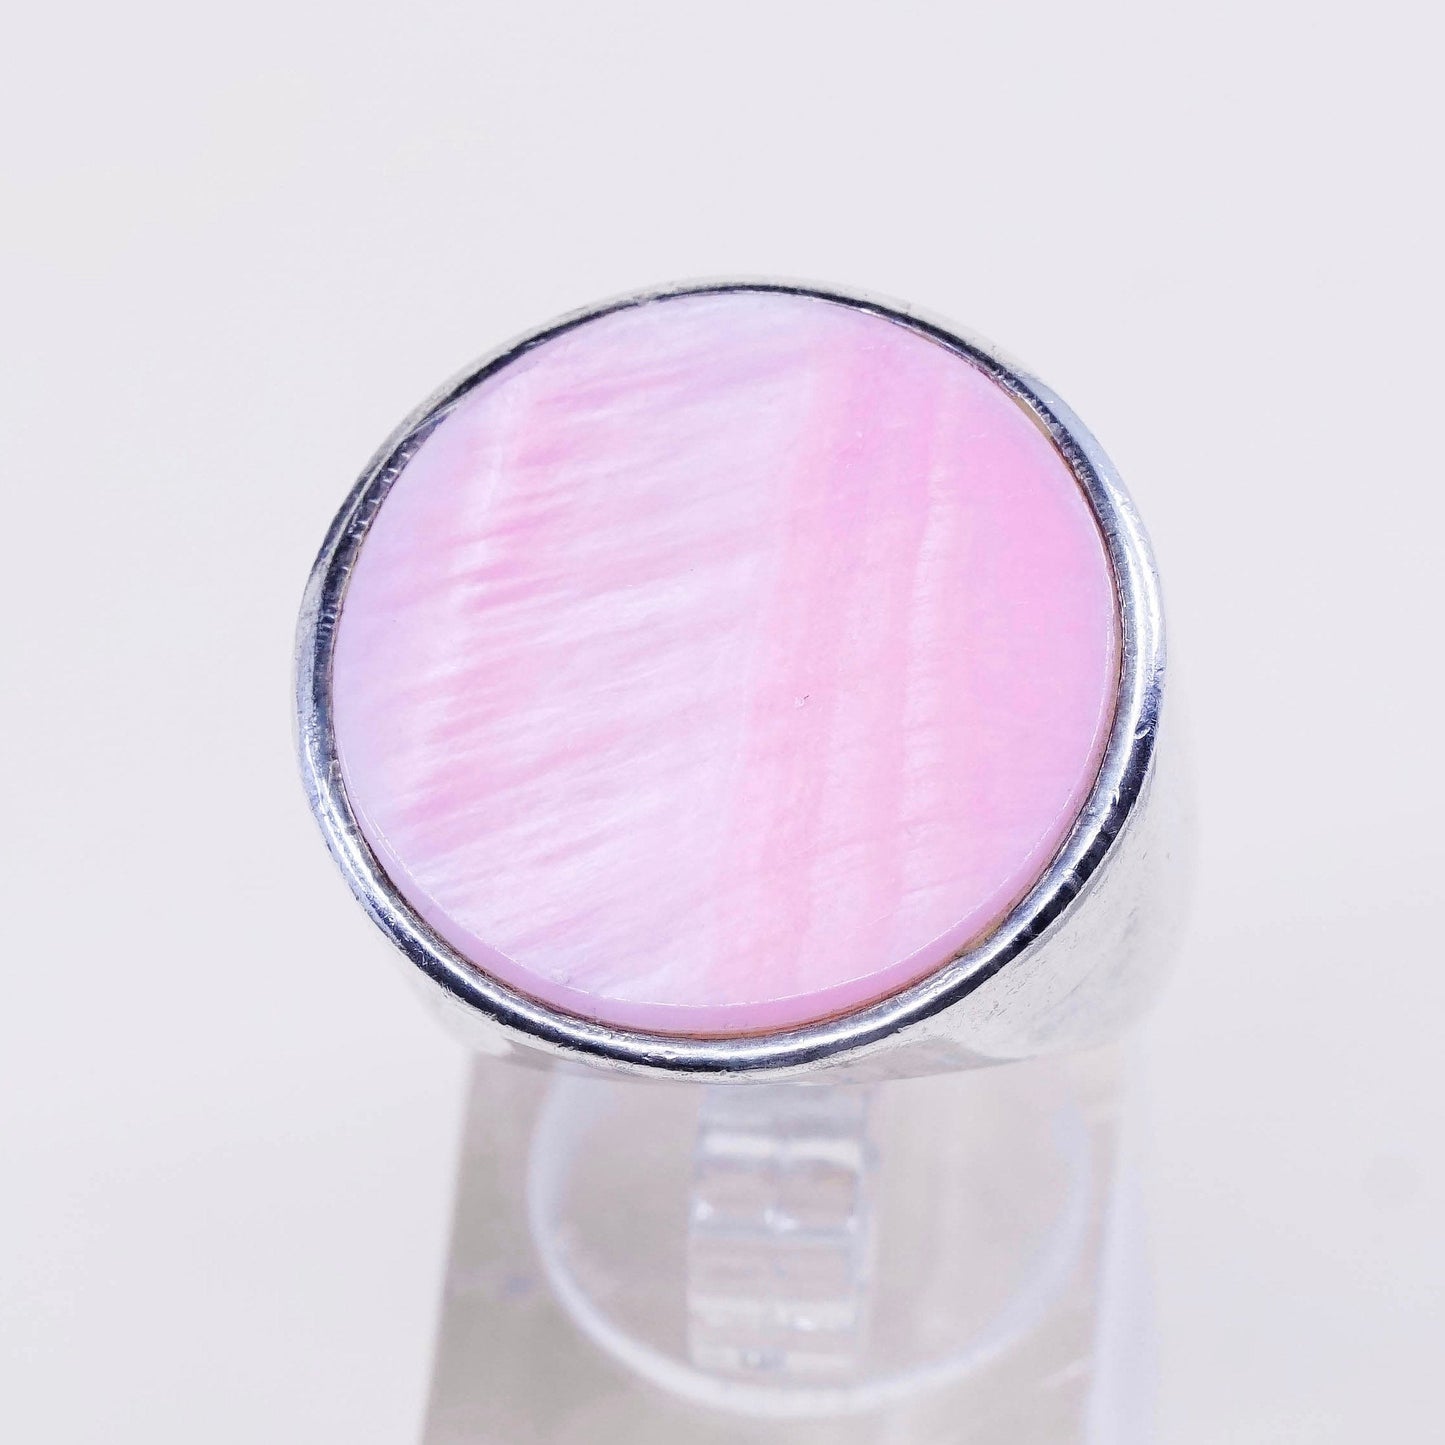 sz 7.25, mexico PB sterling silver handmade ring w/ round pink mother of pearl